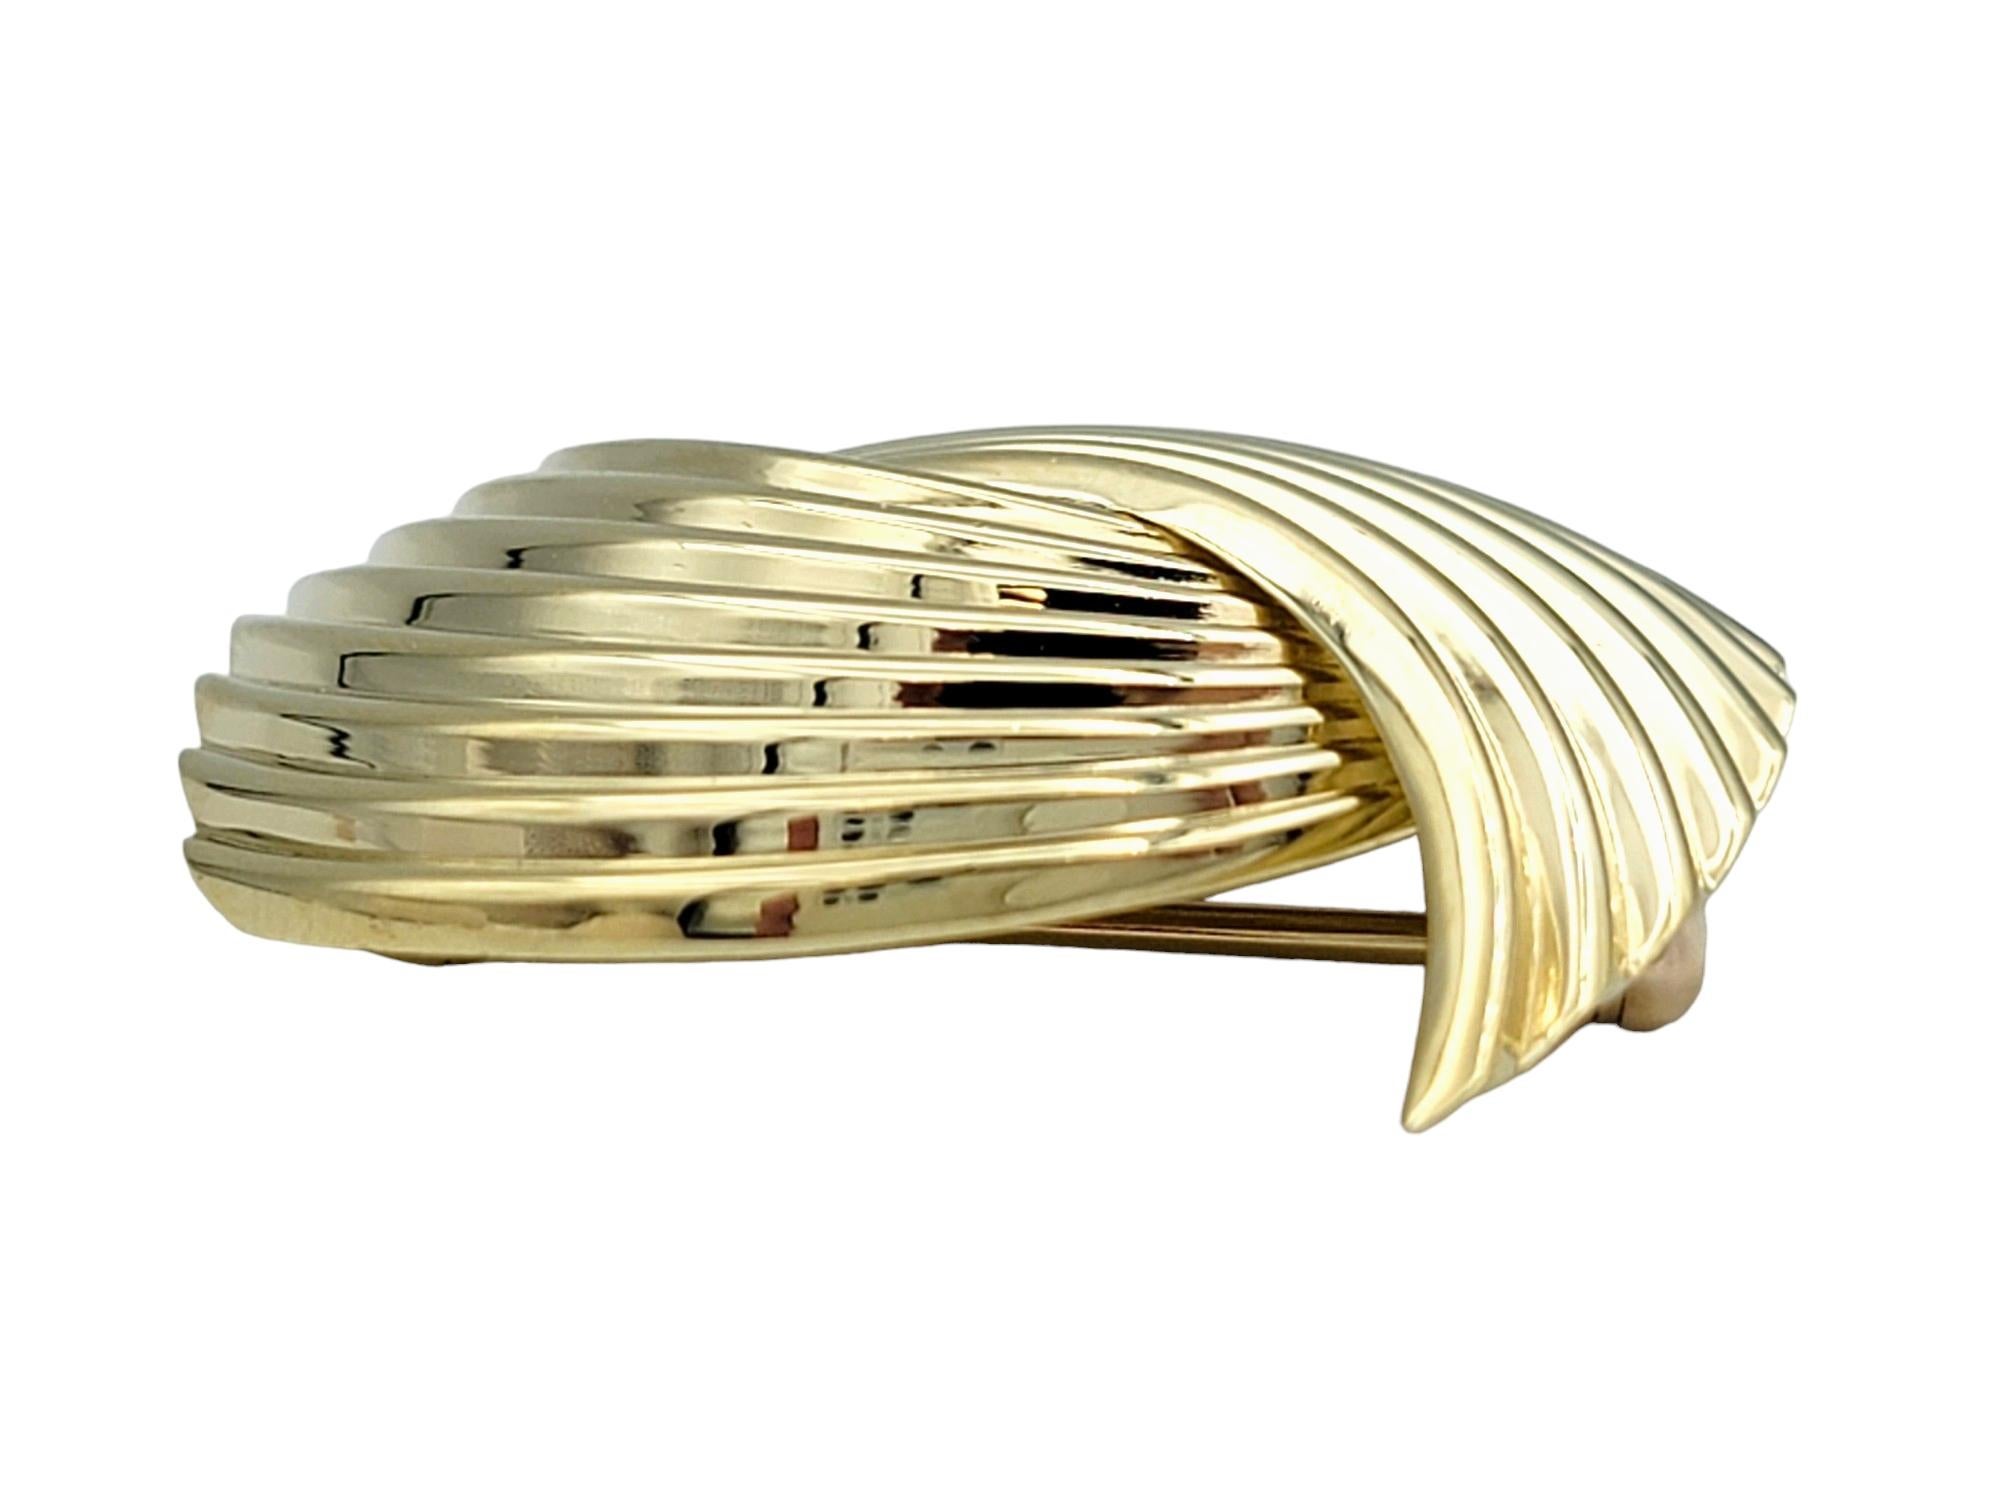 This vintage Cartier brooch features a unique bypass style design, crafted from luxurious 14 karat yellow gold. The ridged texture adds depth and dimension to the piece, giving it a sophisticated and timeless appeal.

This brooch is a testament to